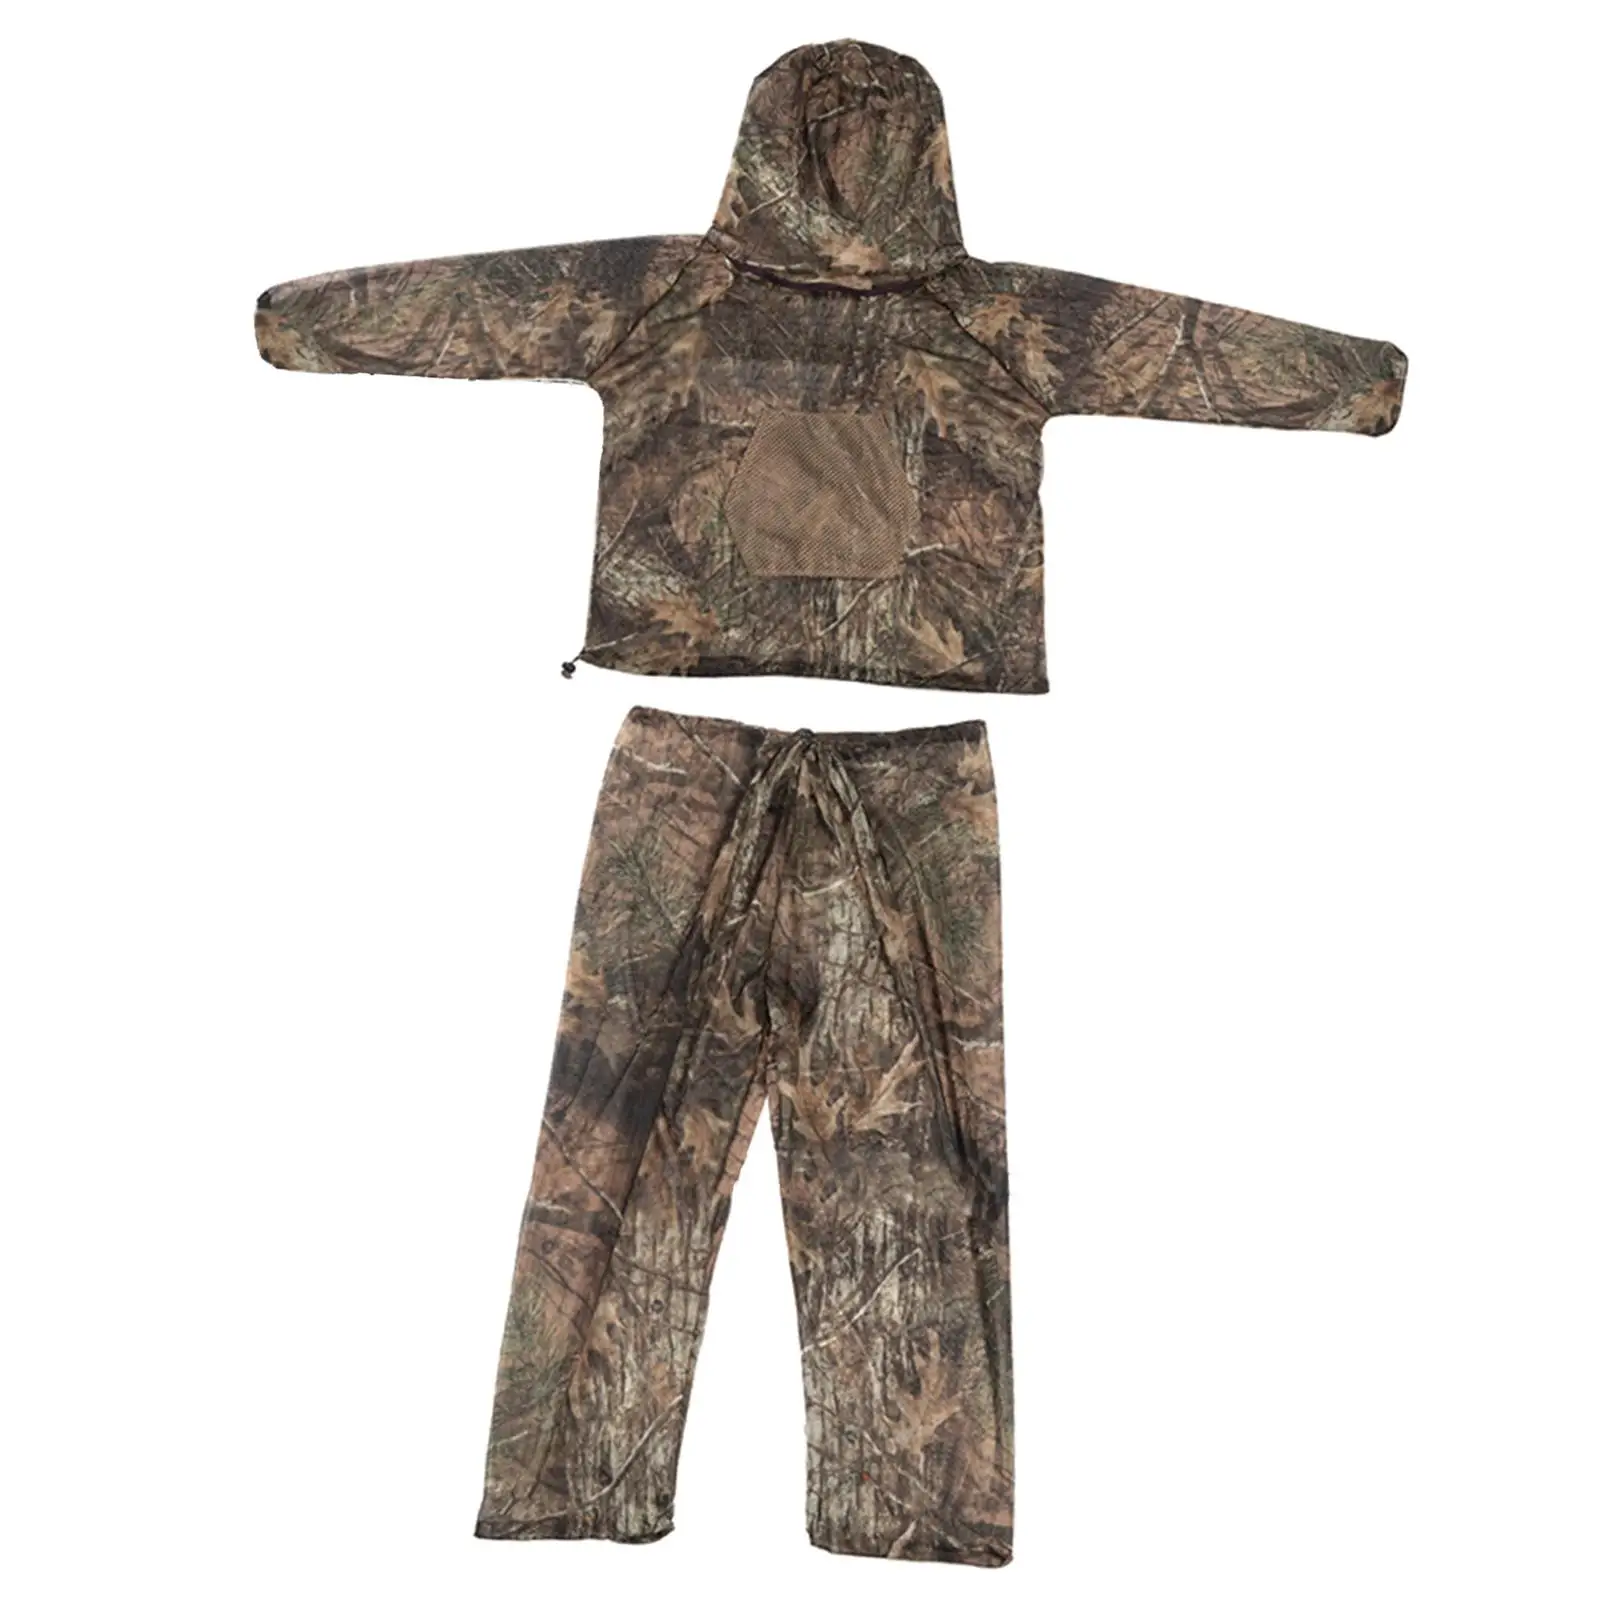 Mesh Hooded Ghillie Suit Pants Summer Net Pants Jacket 3D Camouflage Anti Hunting Bite Clothes for Outdoor Fishing Gardening